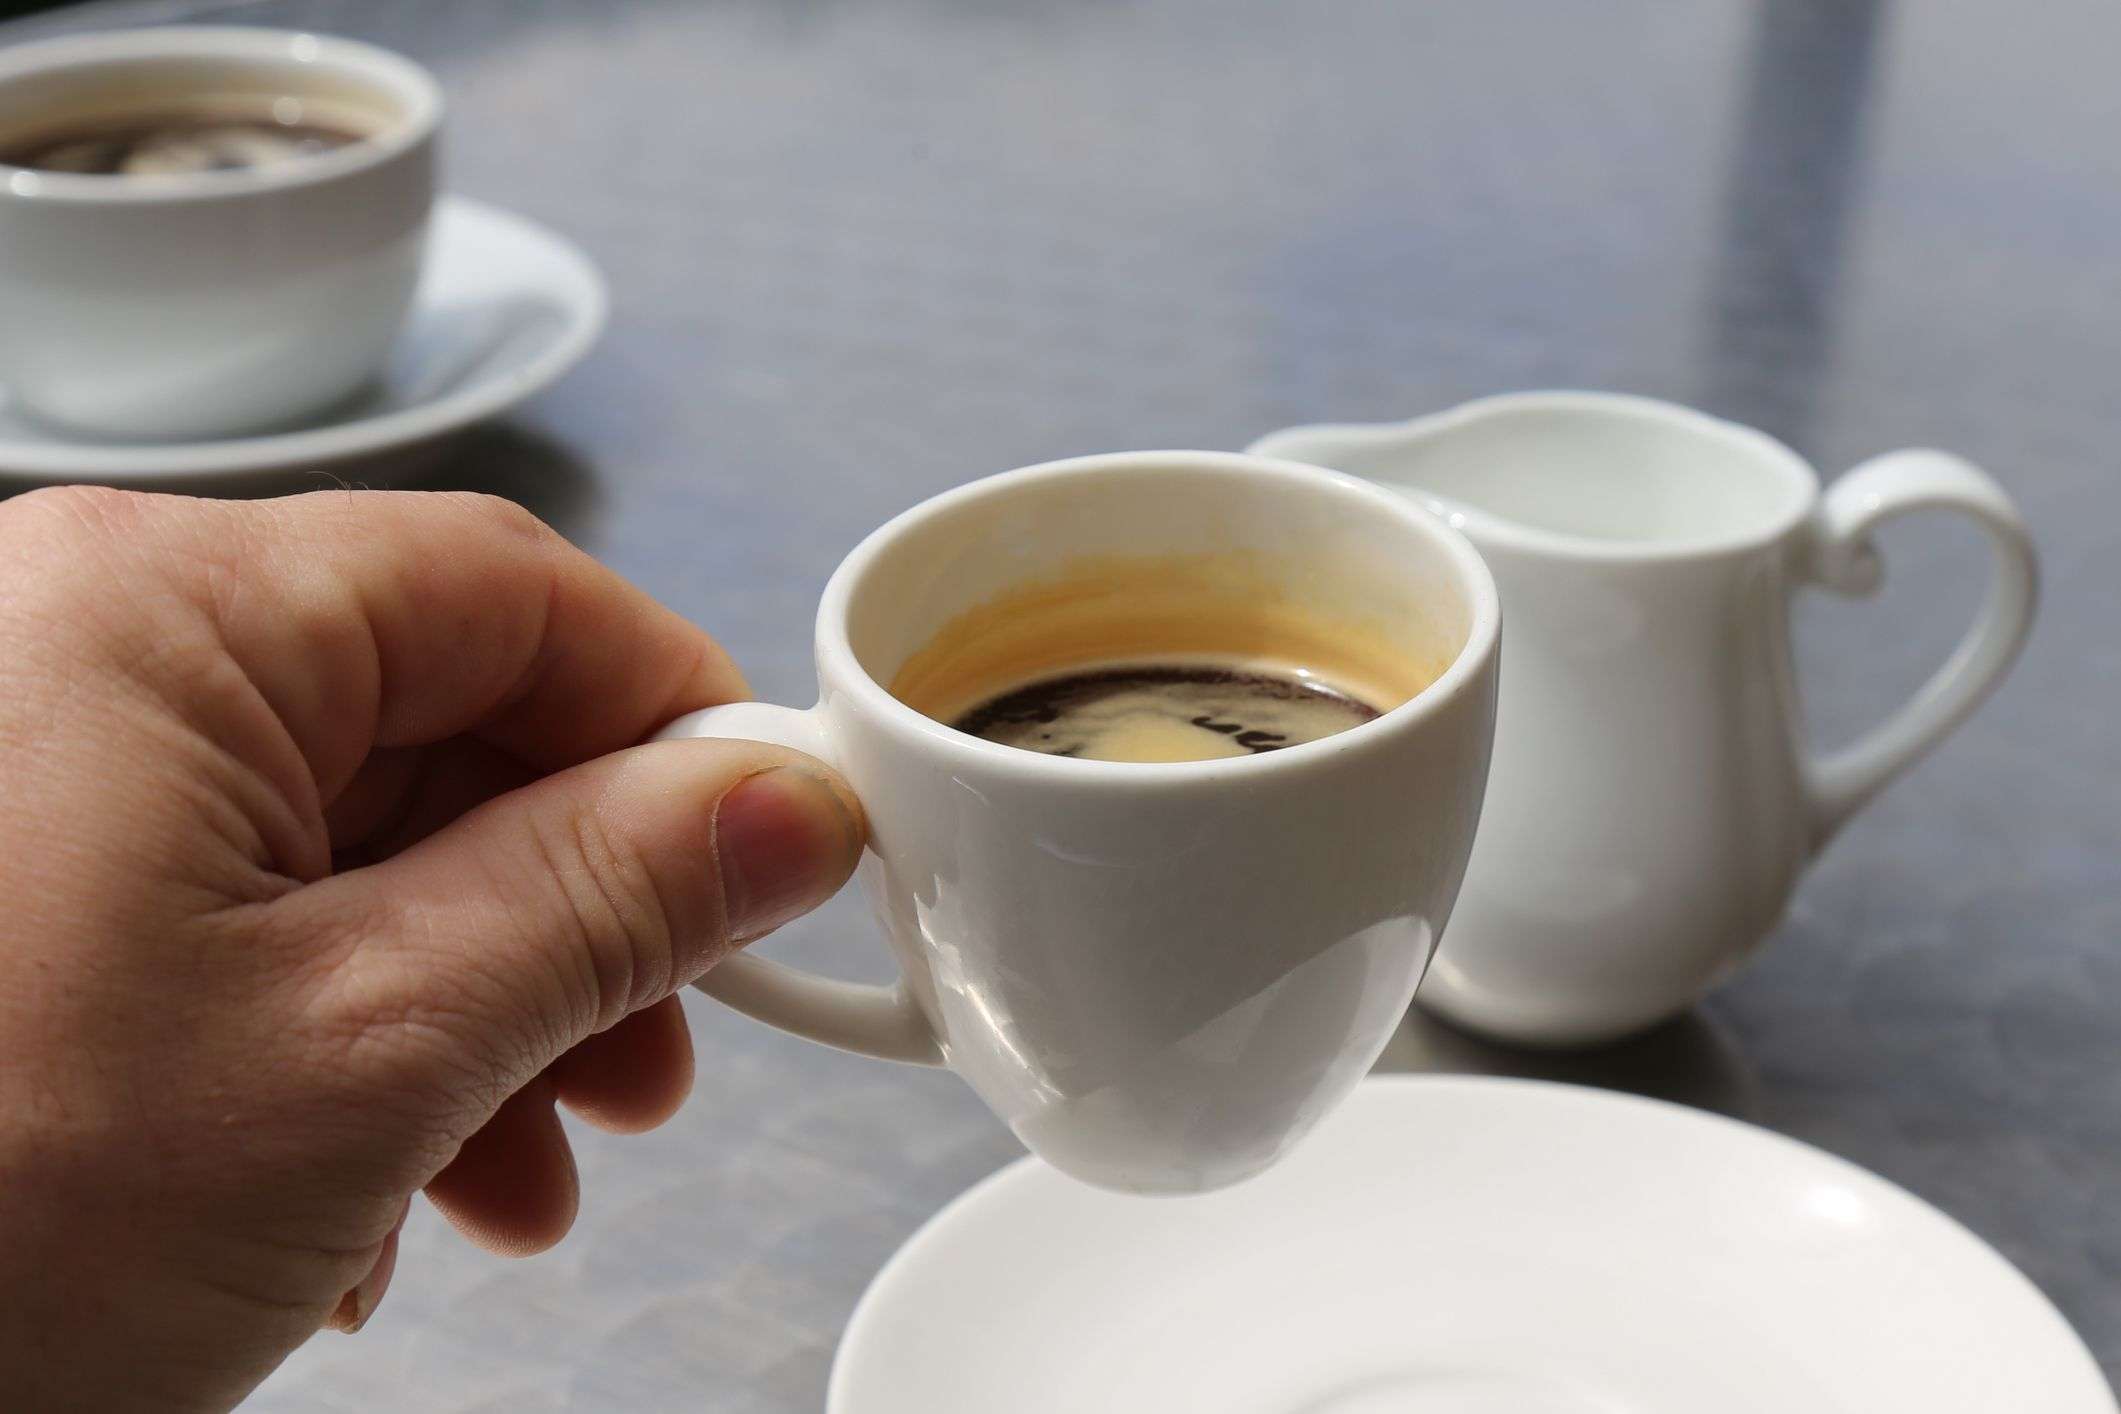 What Is Decaf Coffee? Does It Really Have Less Caffeine?